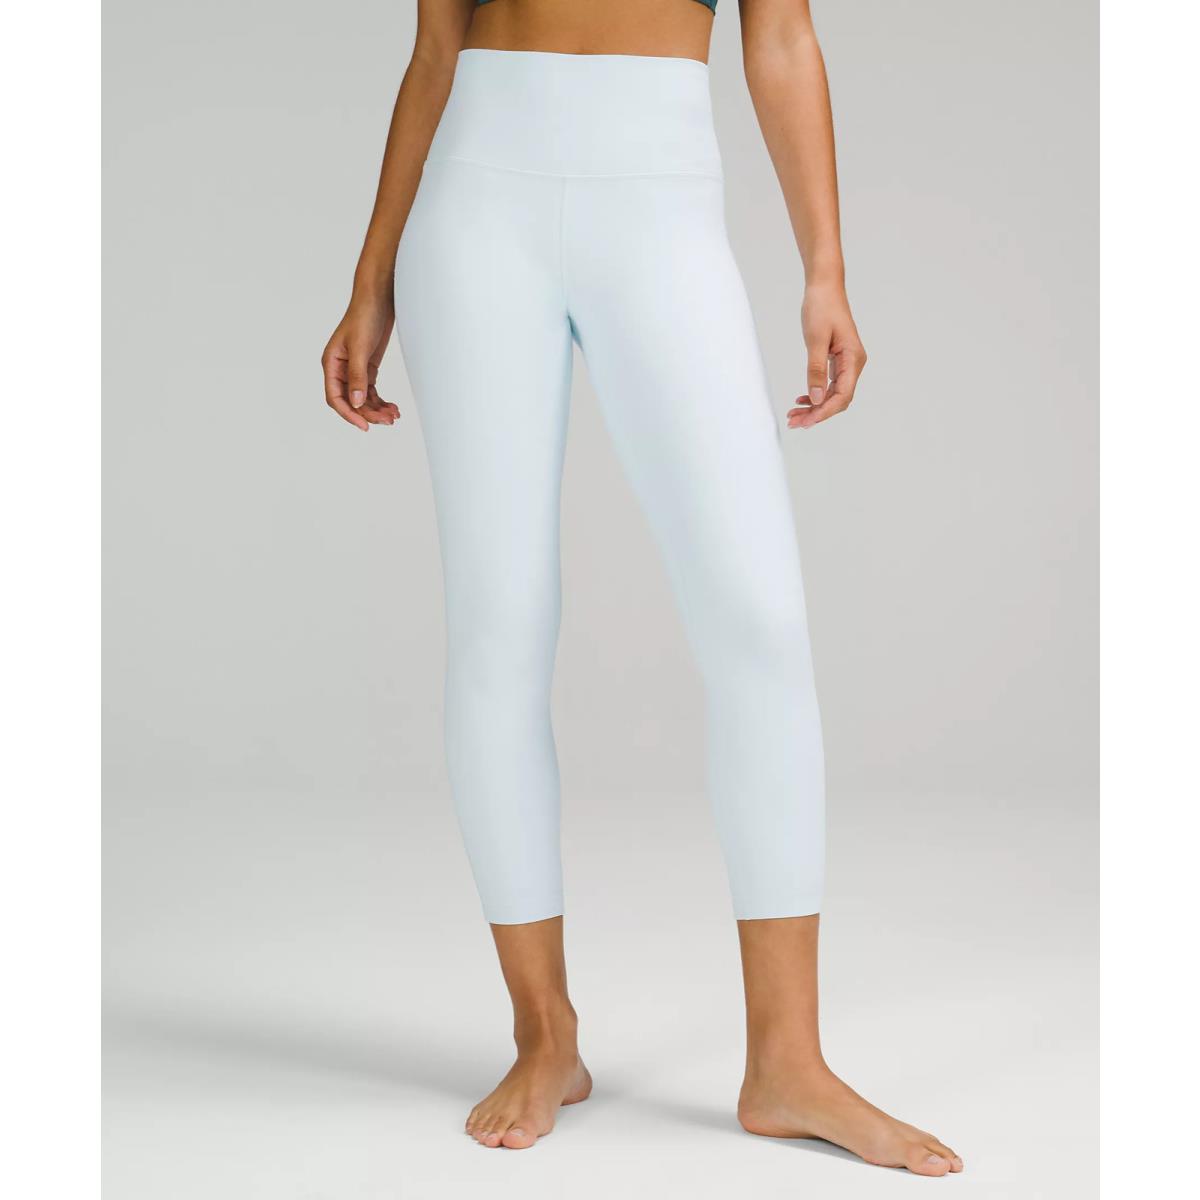 Lululemon Align Nulu High Rise Pant with 25 Inch Inseam Powder Blue